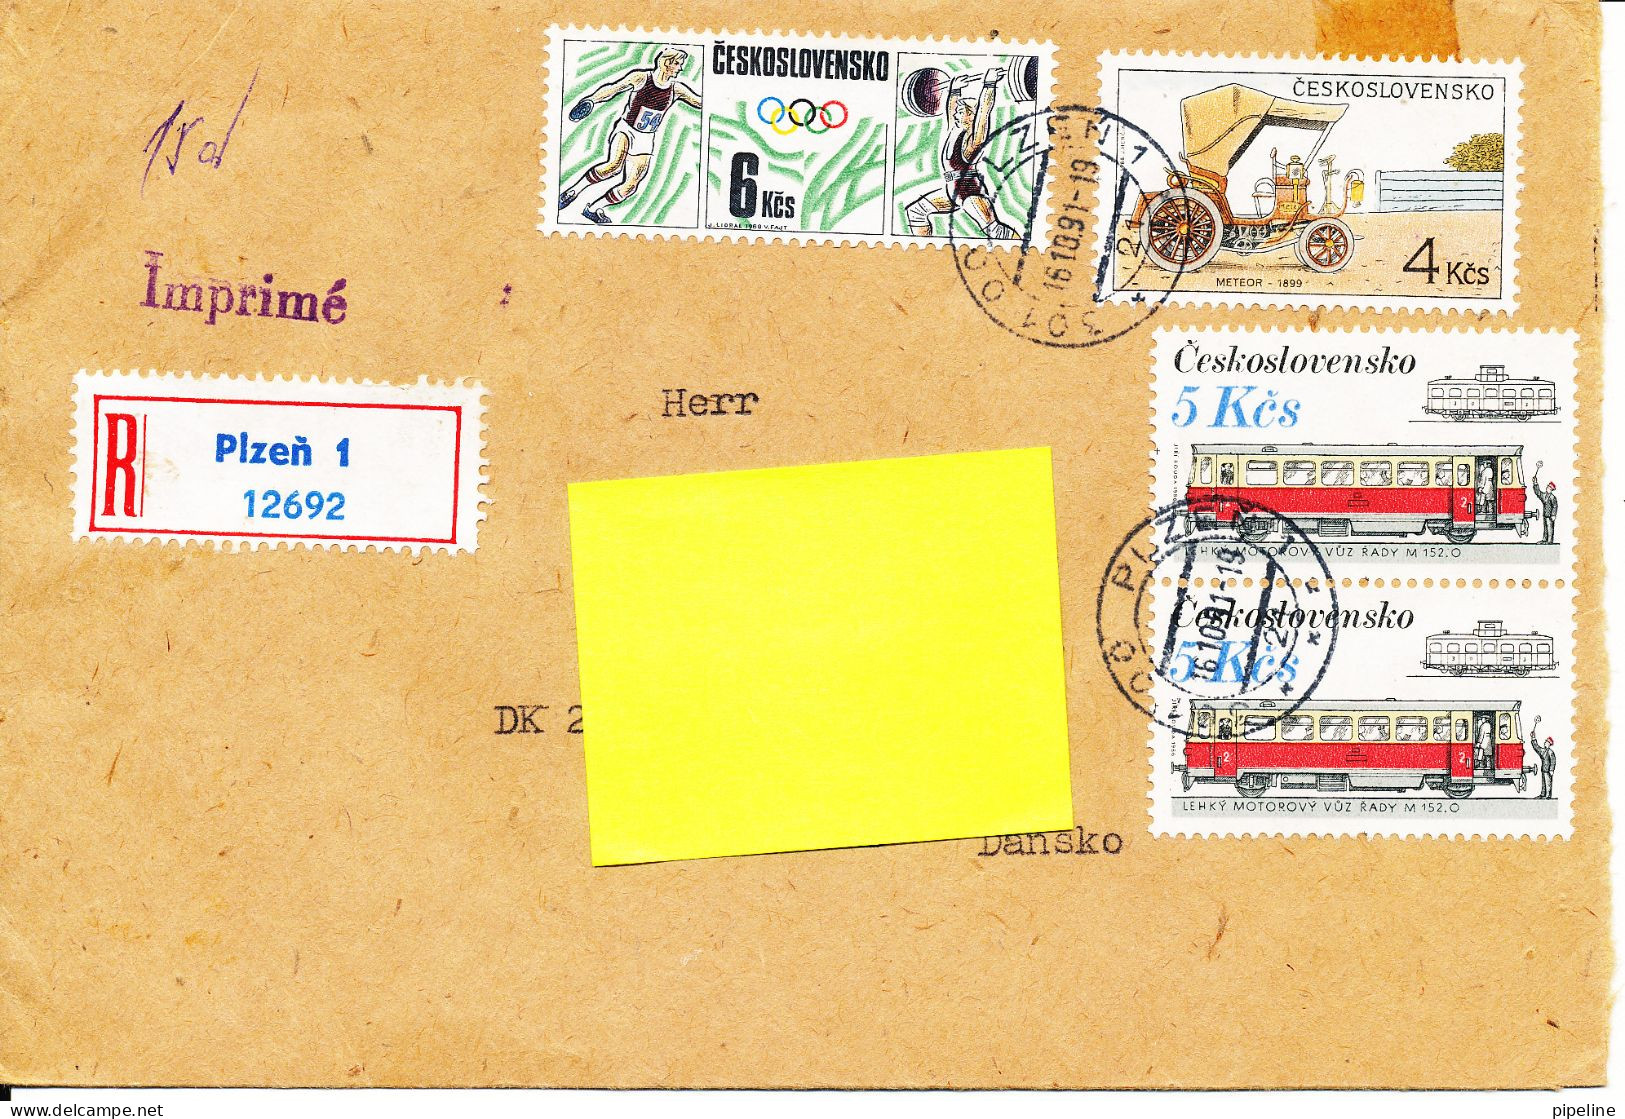 Czechoslovakia Registered Cover Sent To Denmark 16-10-1991 With More Topic Stamps - Covers & Documents